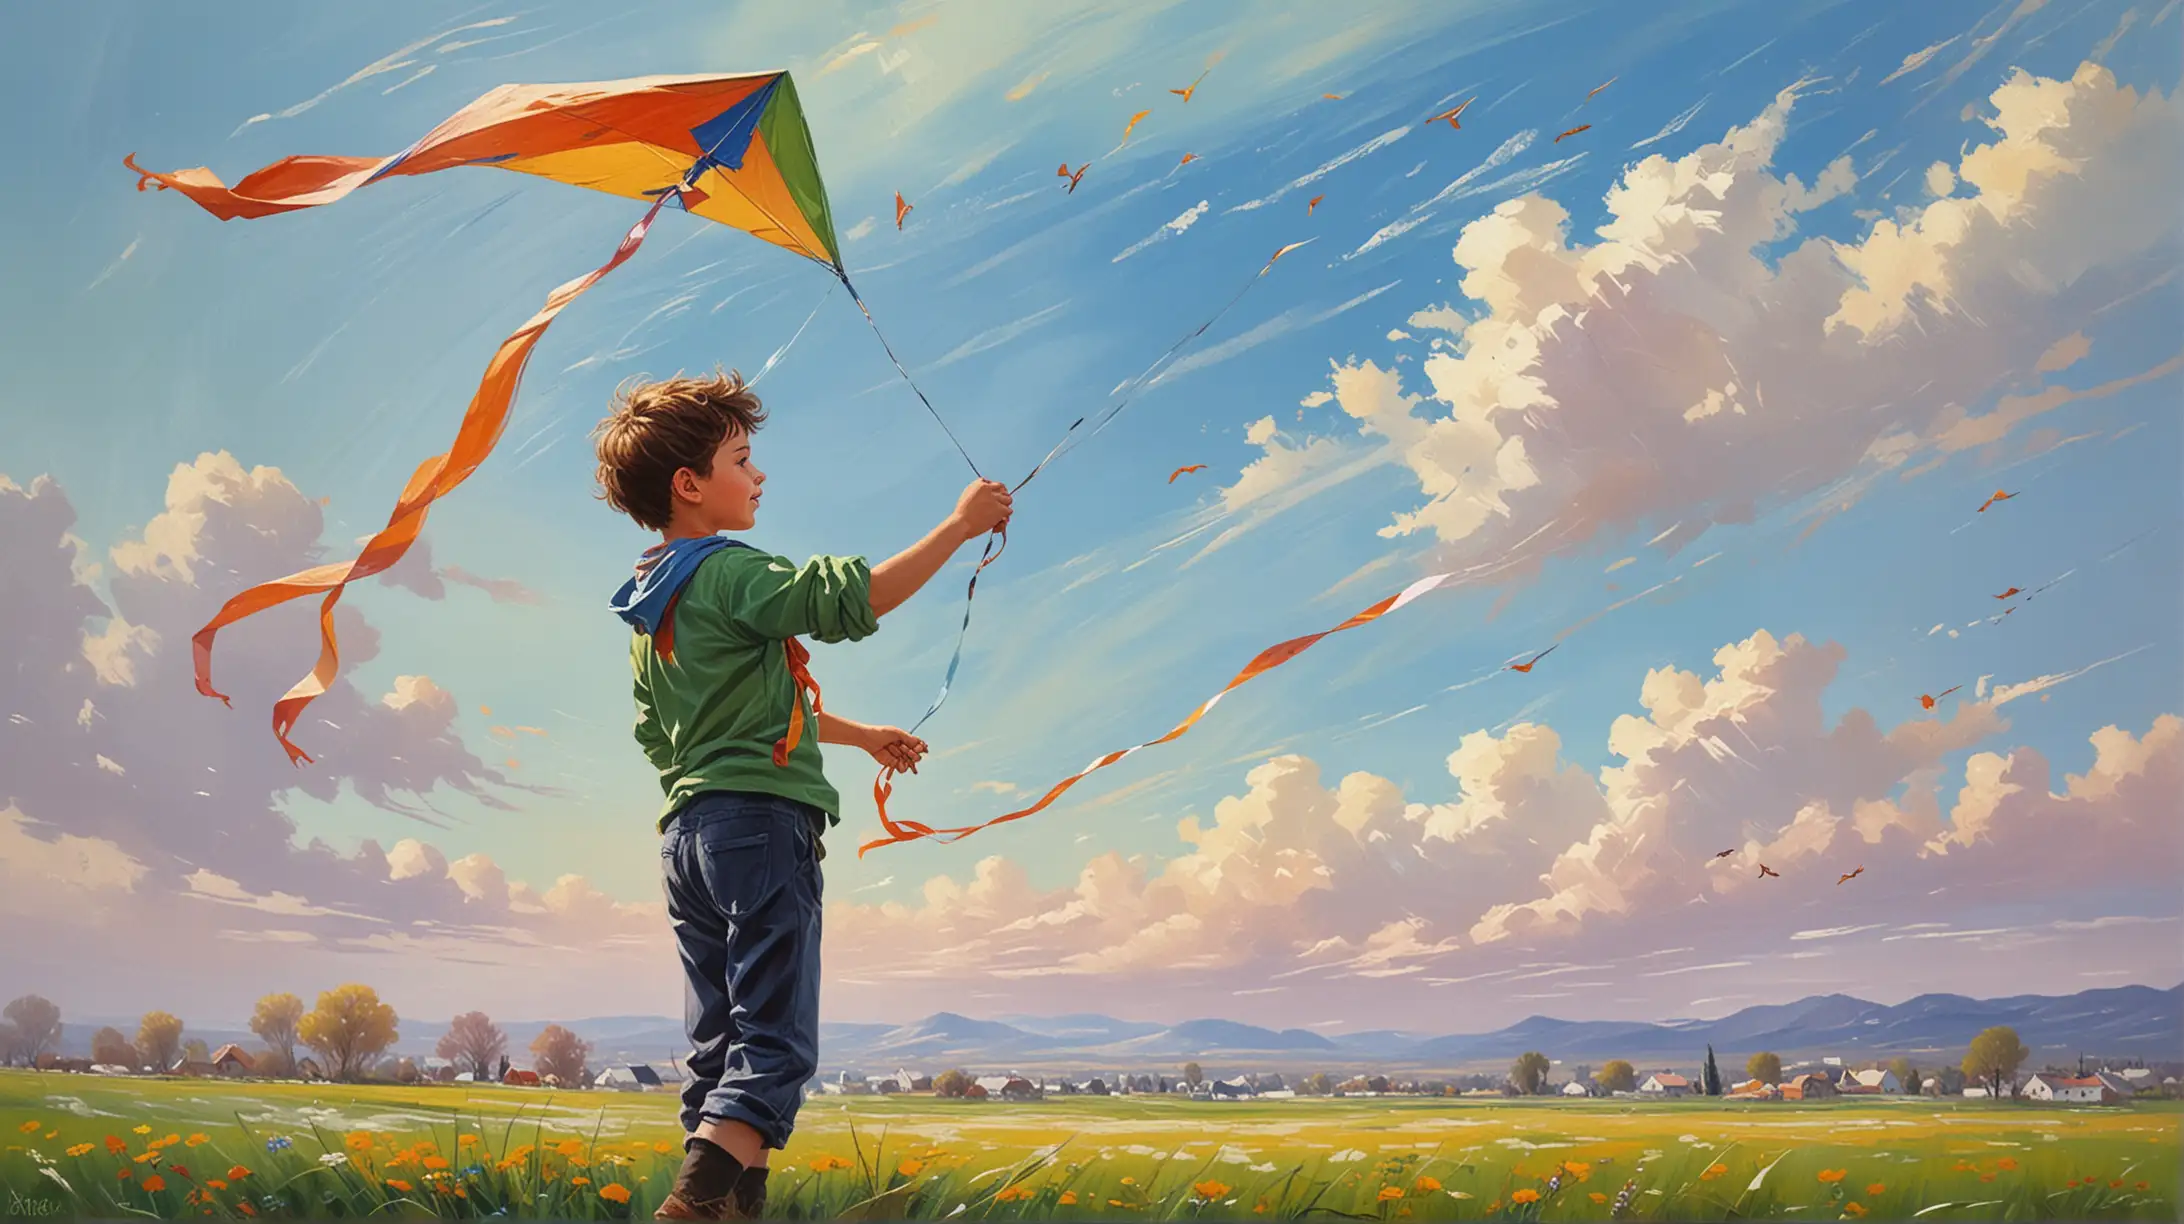 Oil painting, expressive style, colors of spring, a fresh wind, a boy holding the ribbon of a kite flying freely, the wind lifting the kite